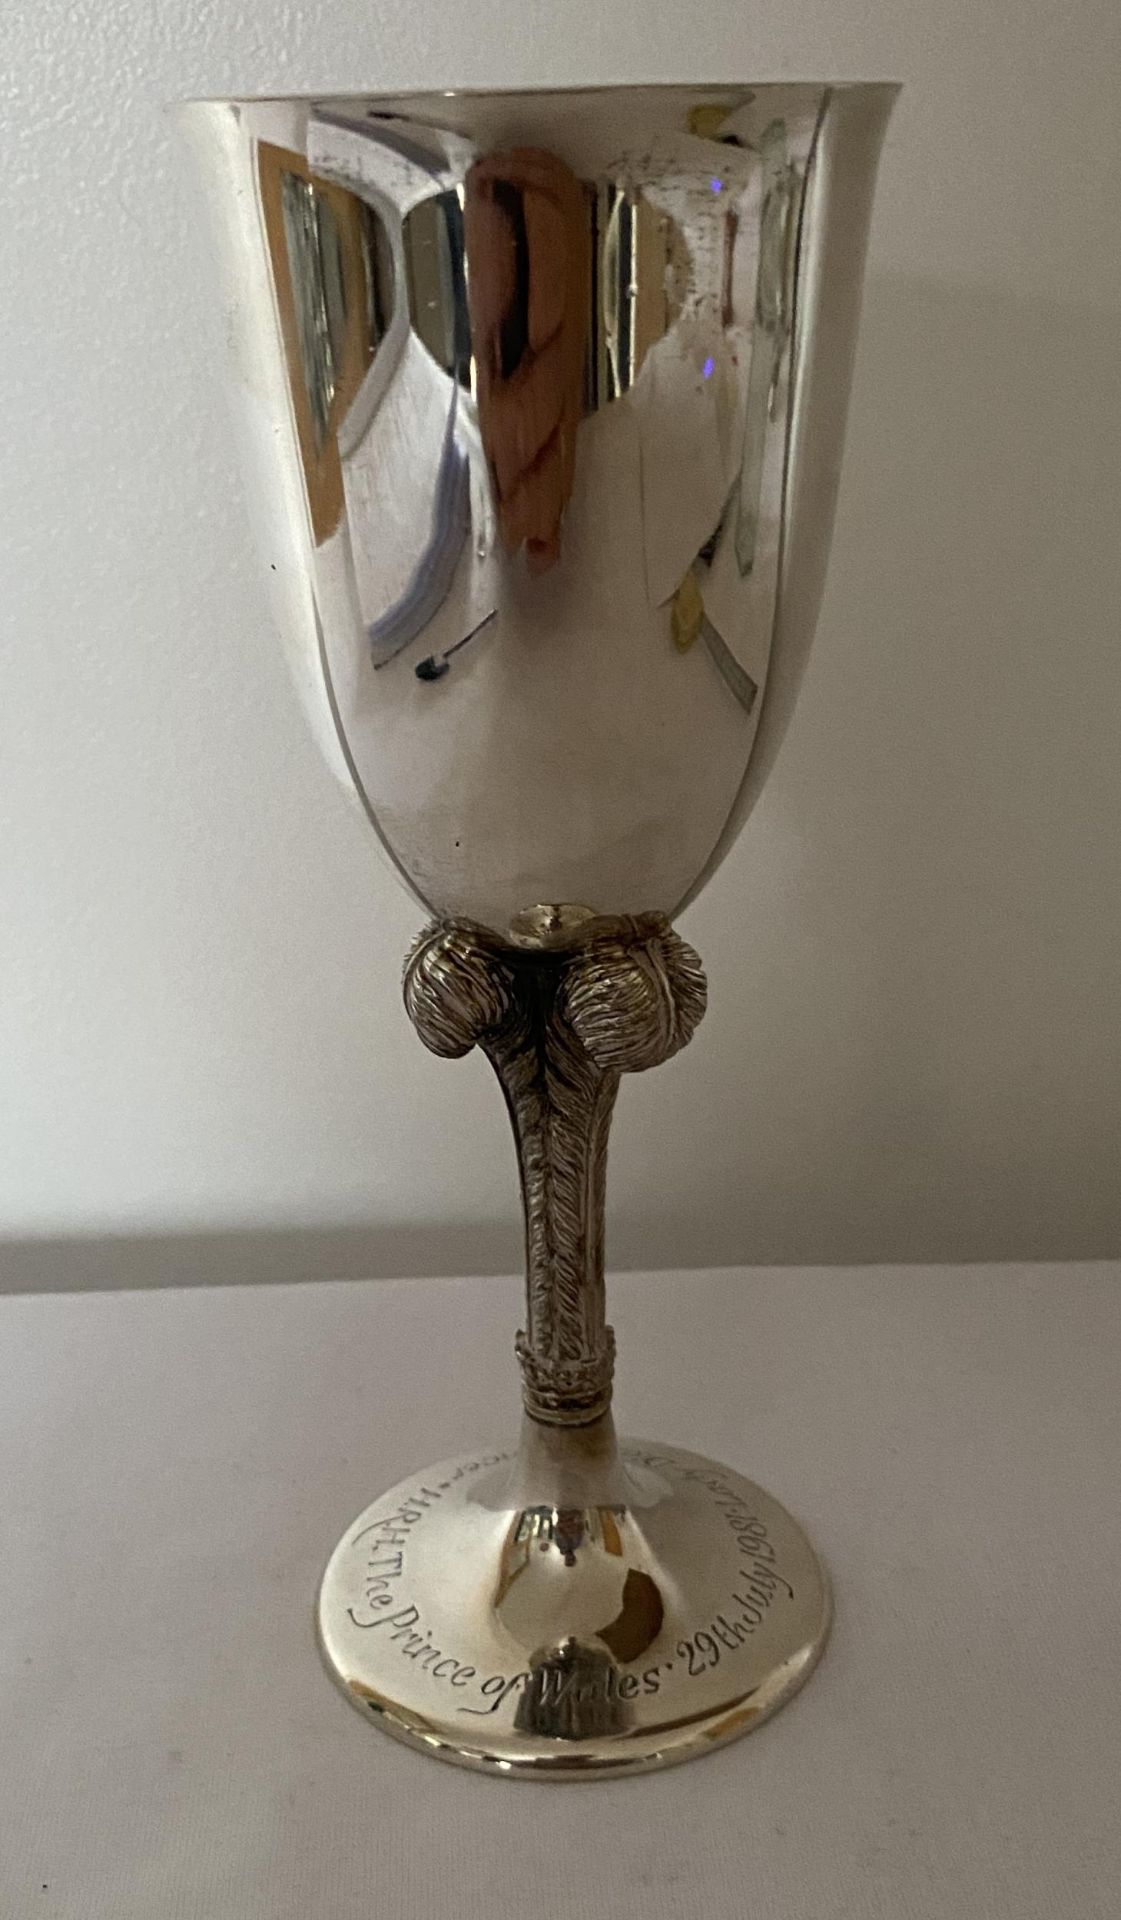 AN ELIZABETH II 1981 HALLMARKED LONDON SILVER COMMEMORATIVE LADY DIANA AND PRINCE CHARLES GOBLET